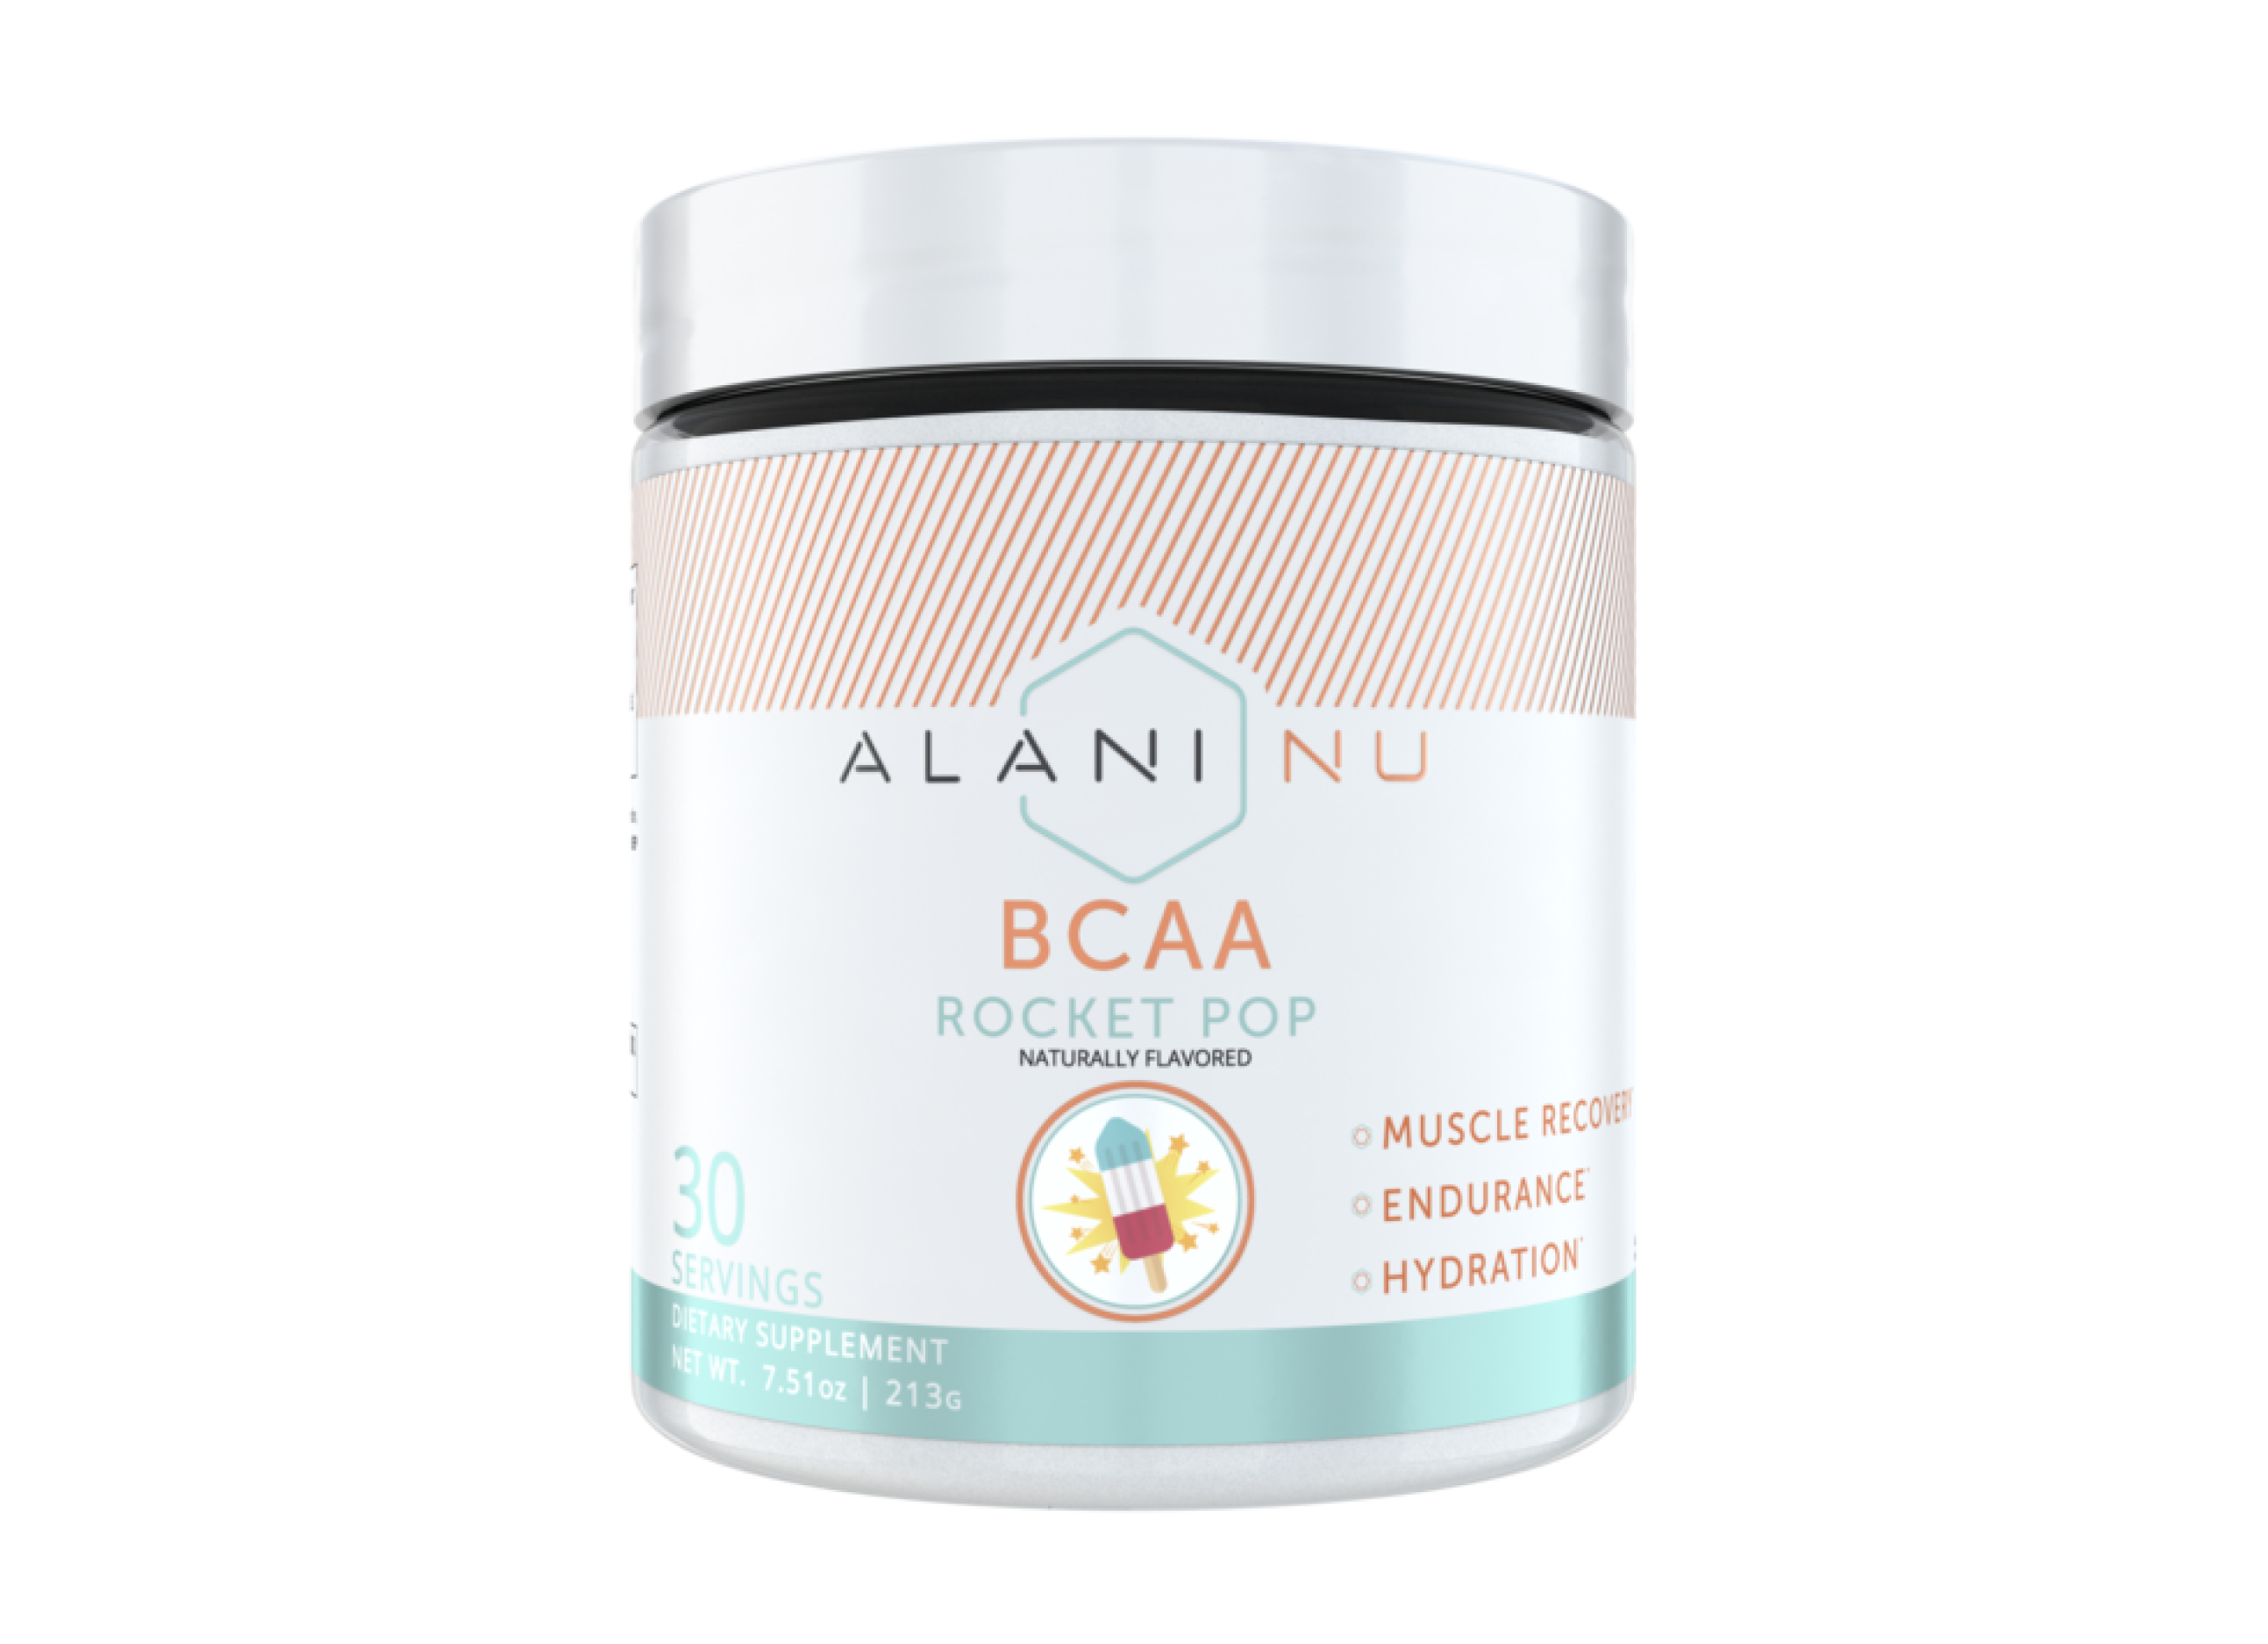 Alani Nu BCAA – Amino Acids – Professional Supplements & Protein From A-list Nutrition